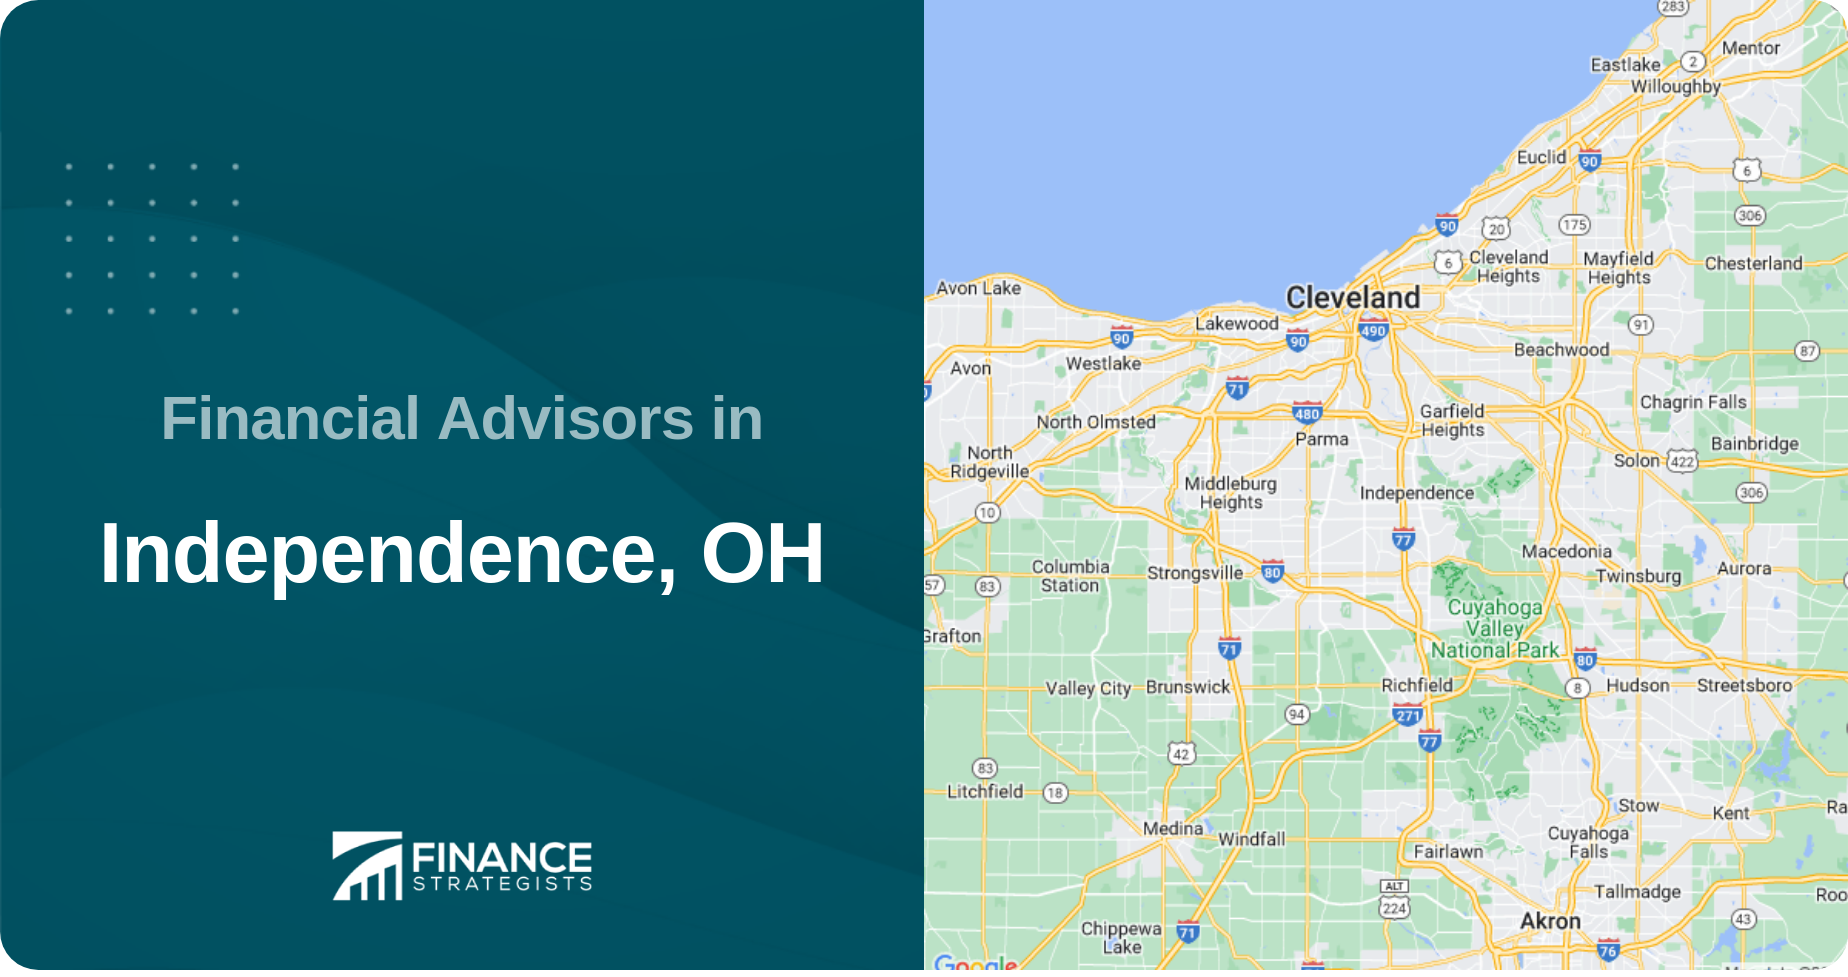 Financial Advisors in Independence, OH